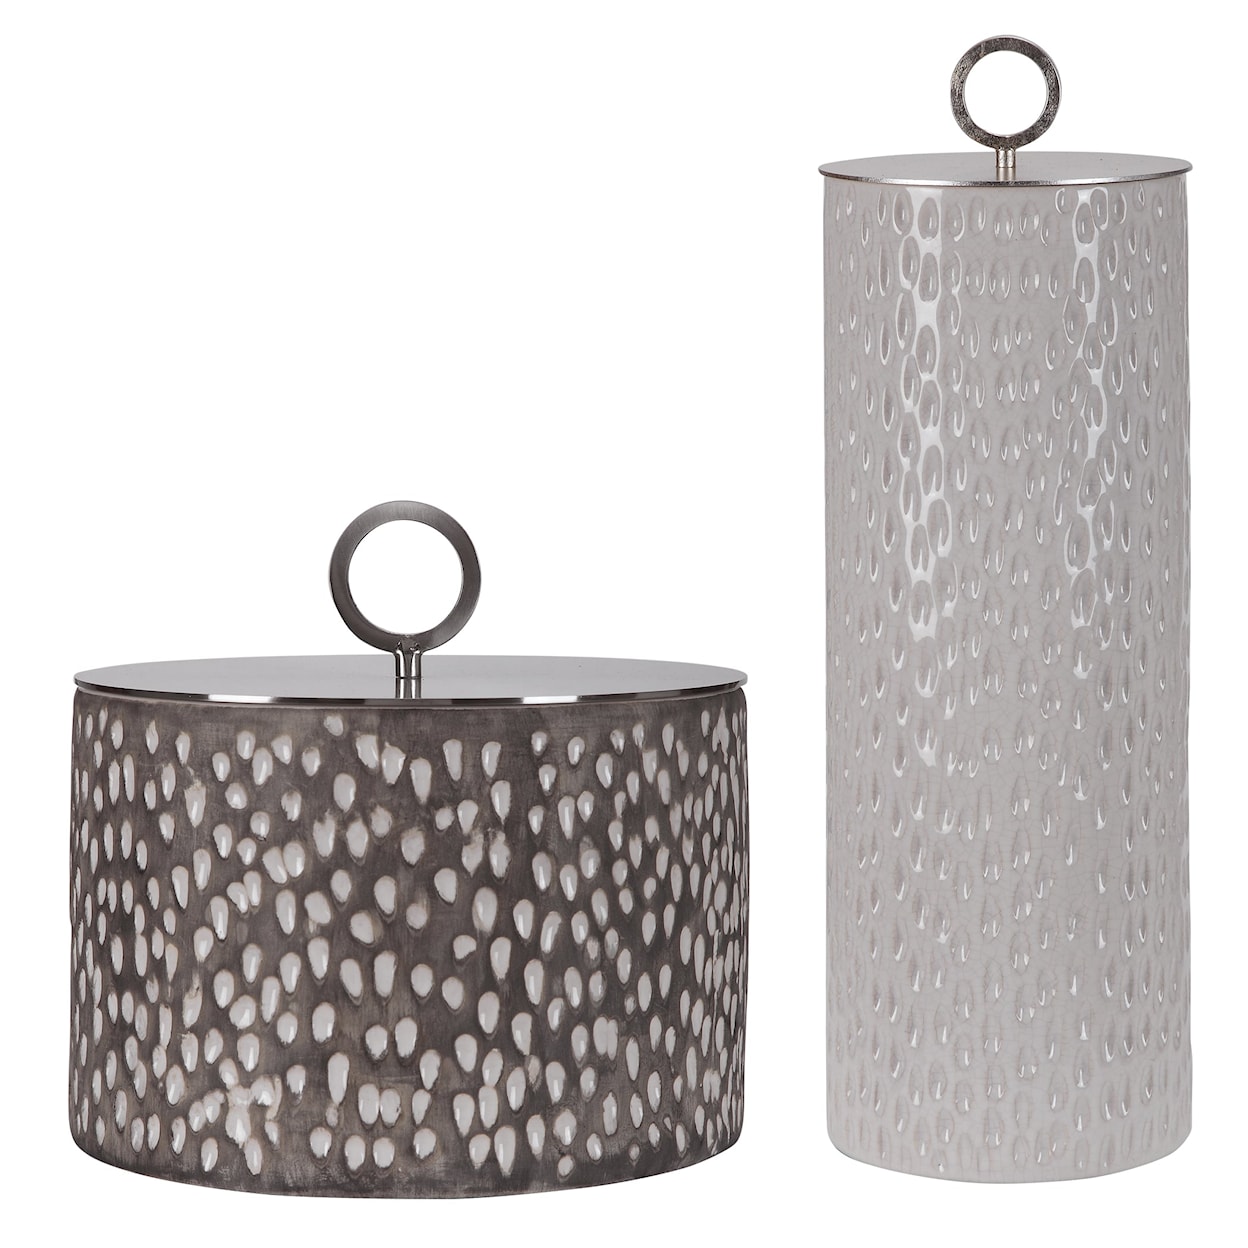 Uttermost Accessories Cyprien Ceramic Containers, S/2